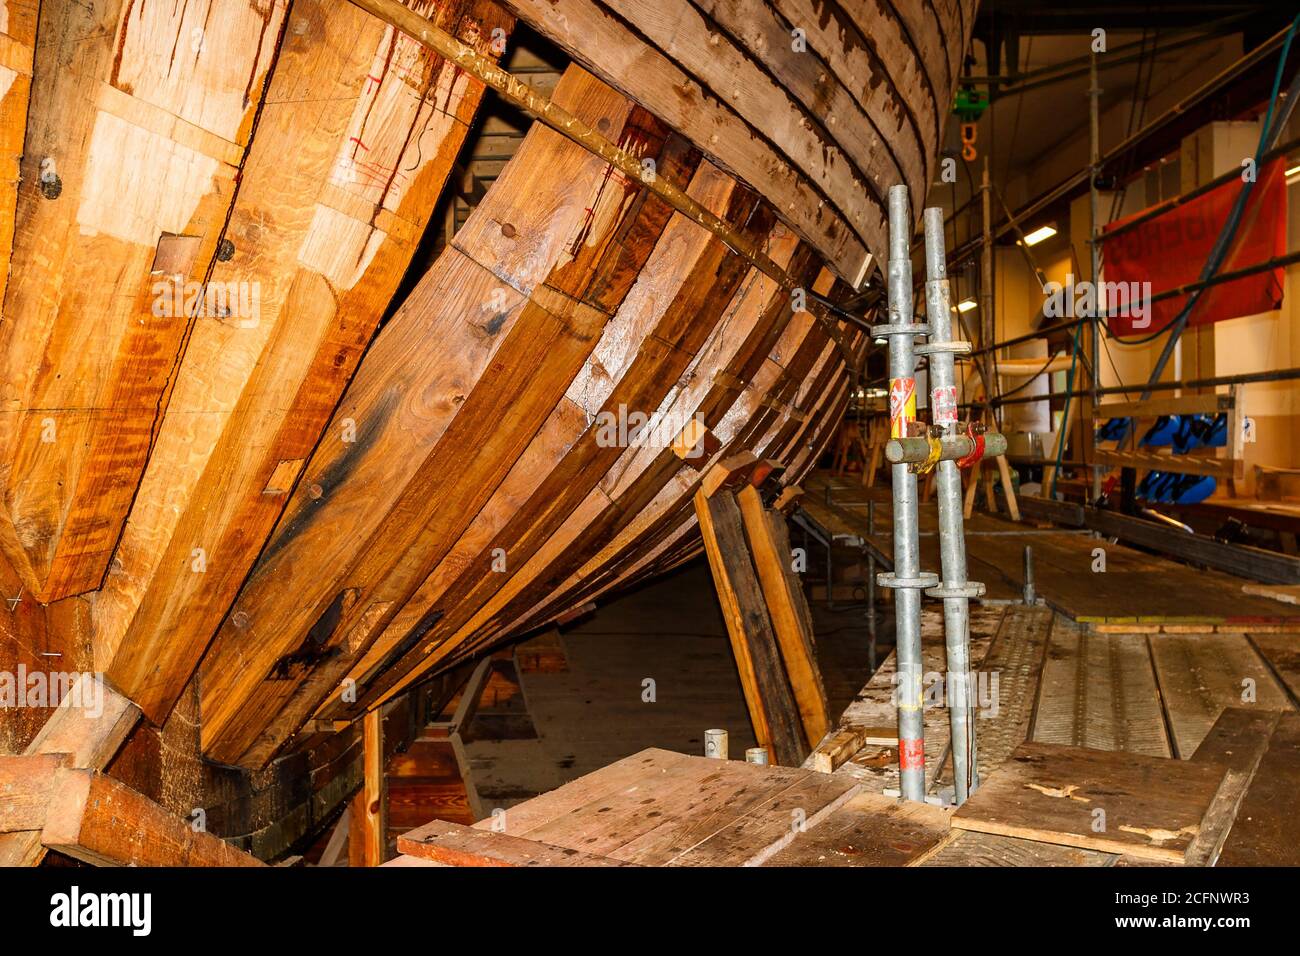 Shipbuilding in a shipyard of an old wooden ship Stock Photo - Alamy